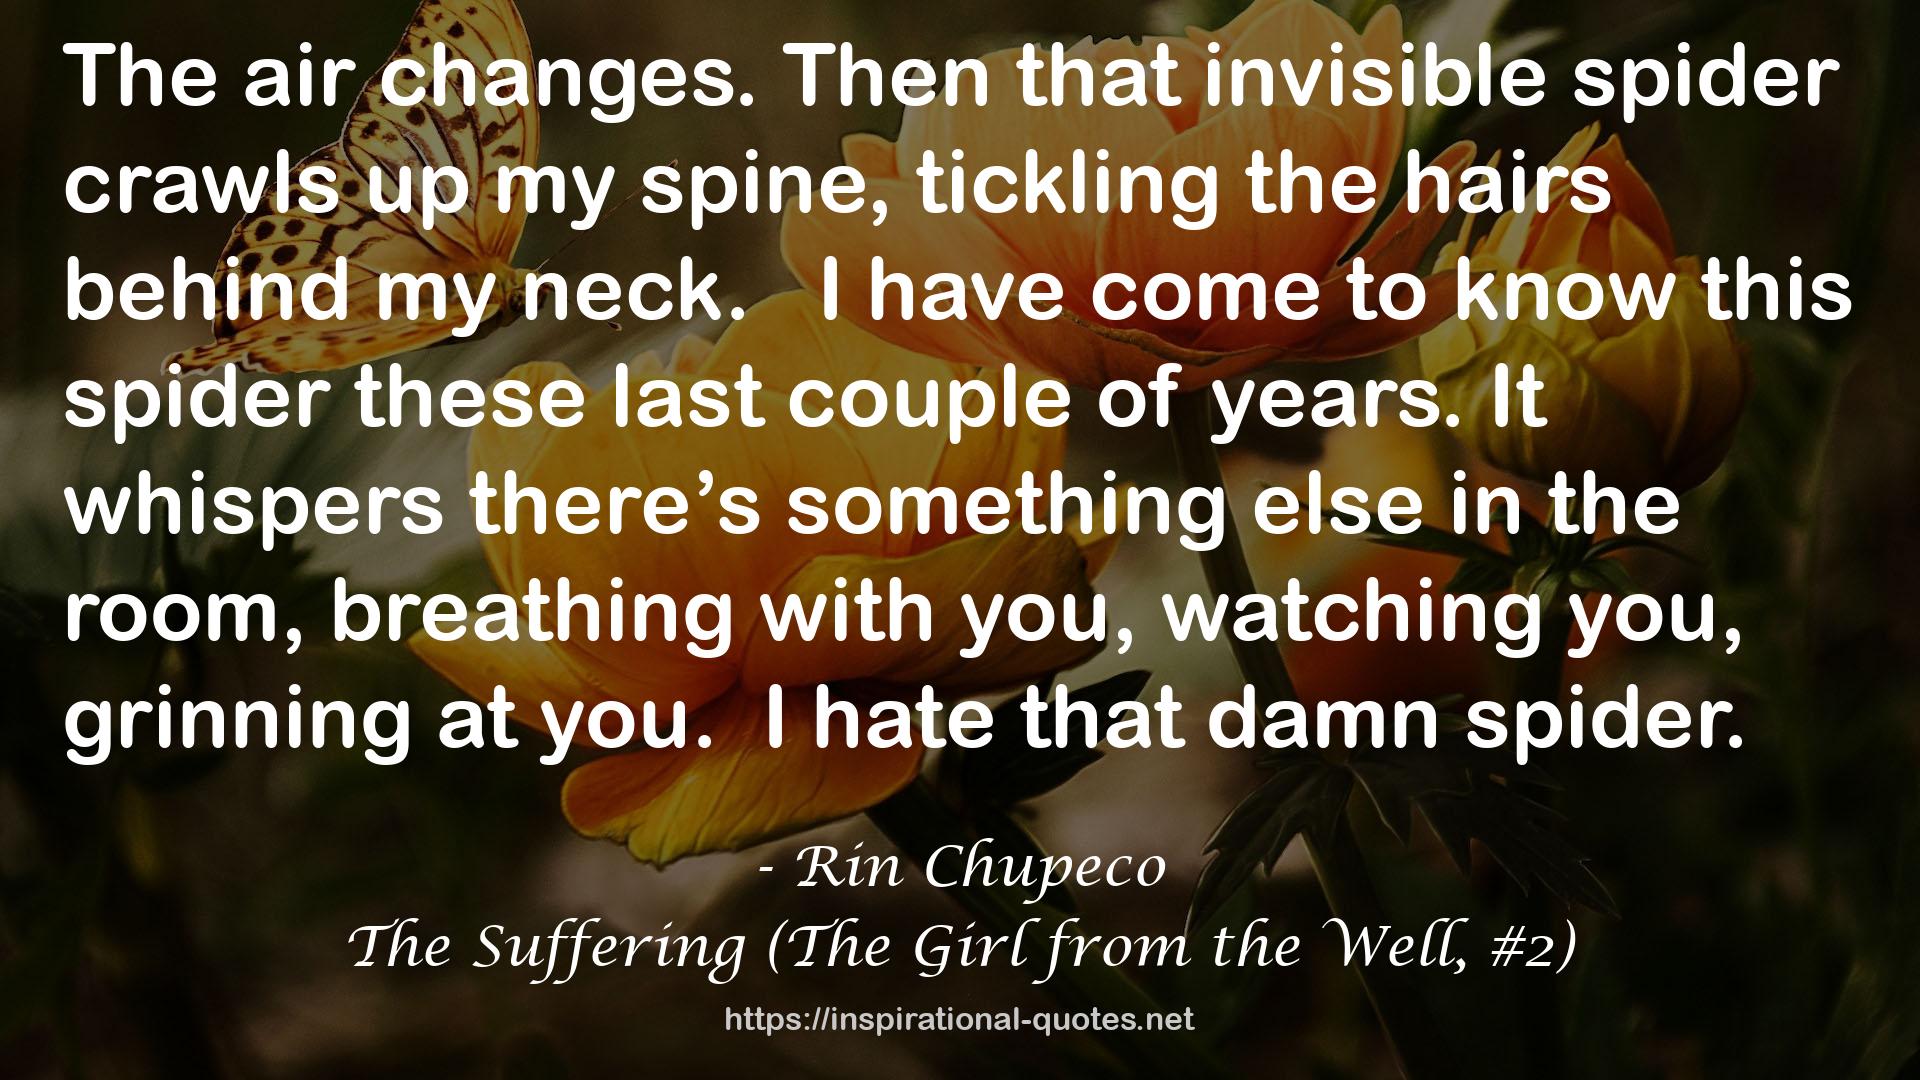 The Suffering (The Girl from the Well, #2) QUOTES